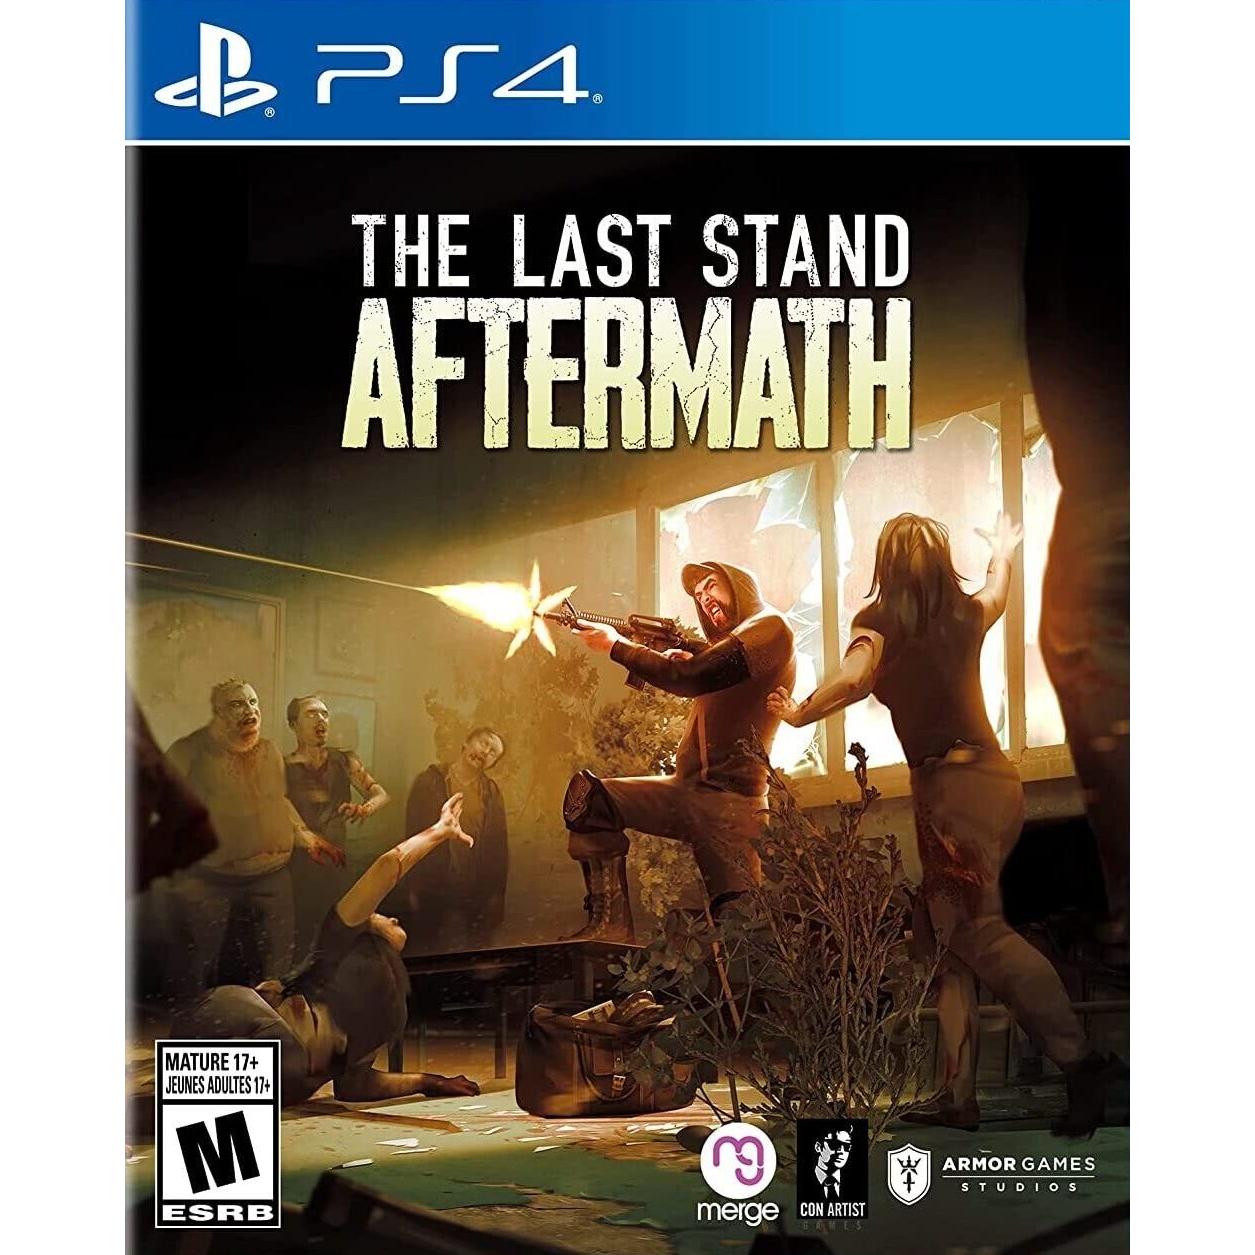 PS4 - The Last Stand Aftermath